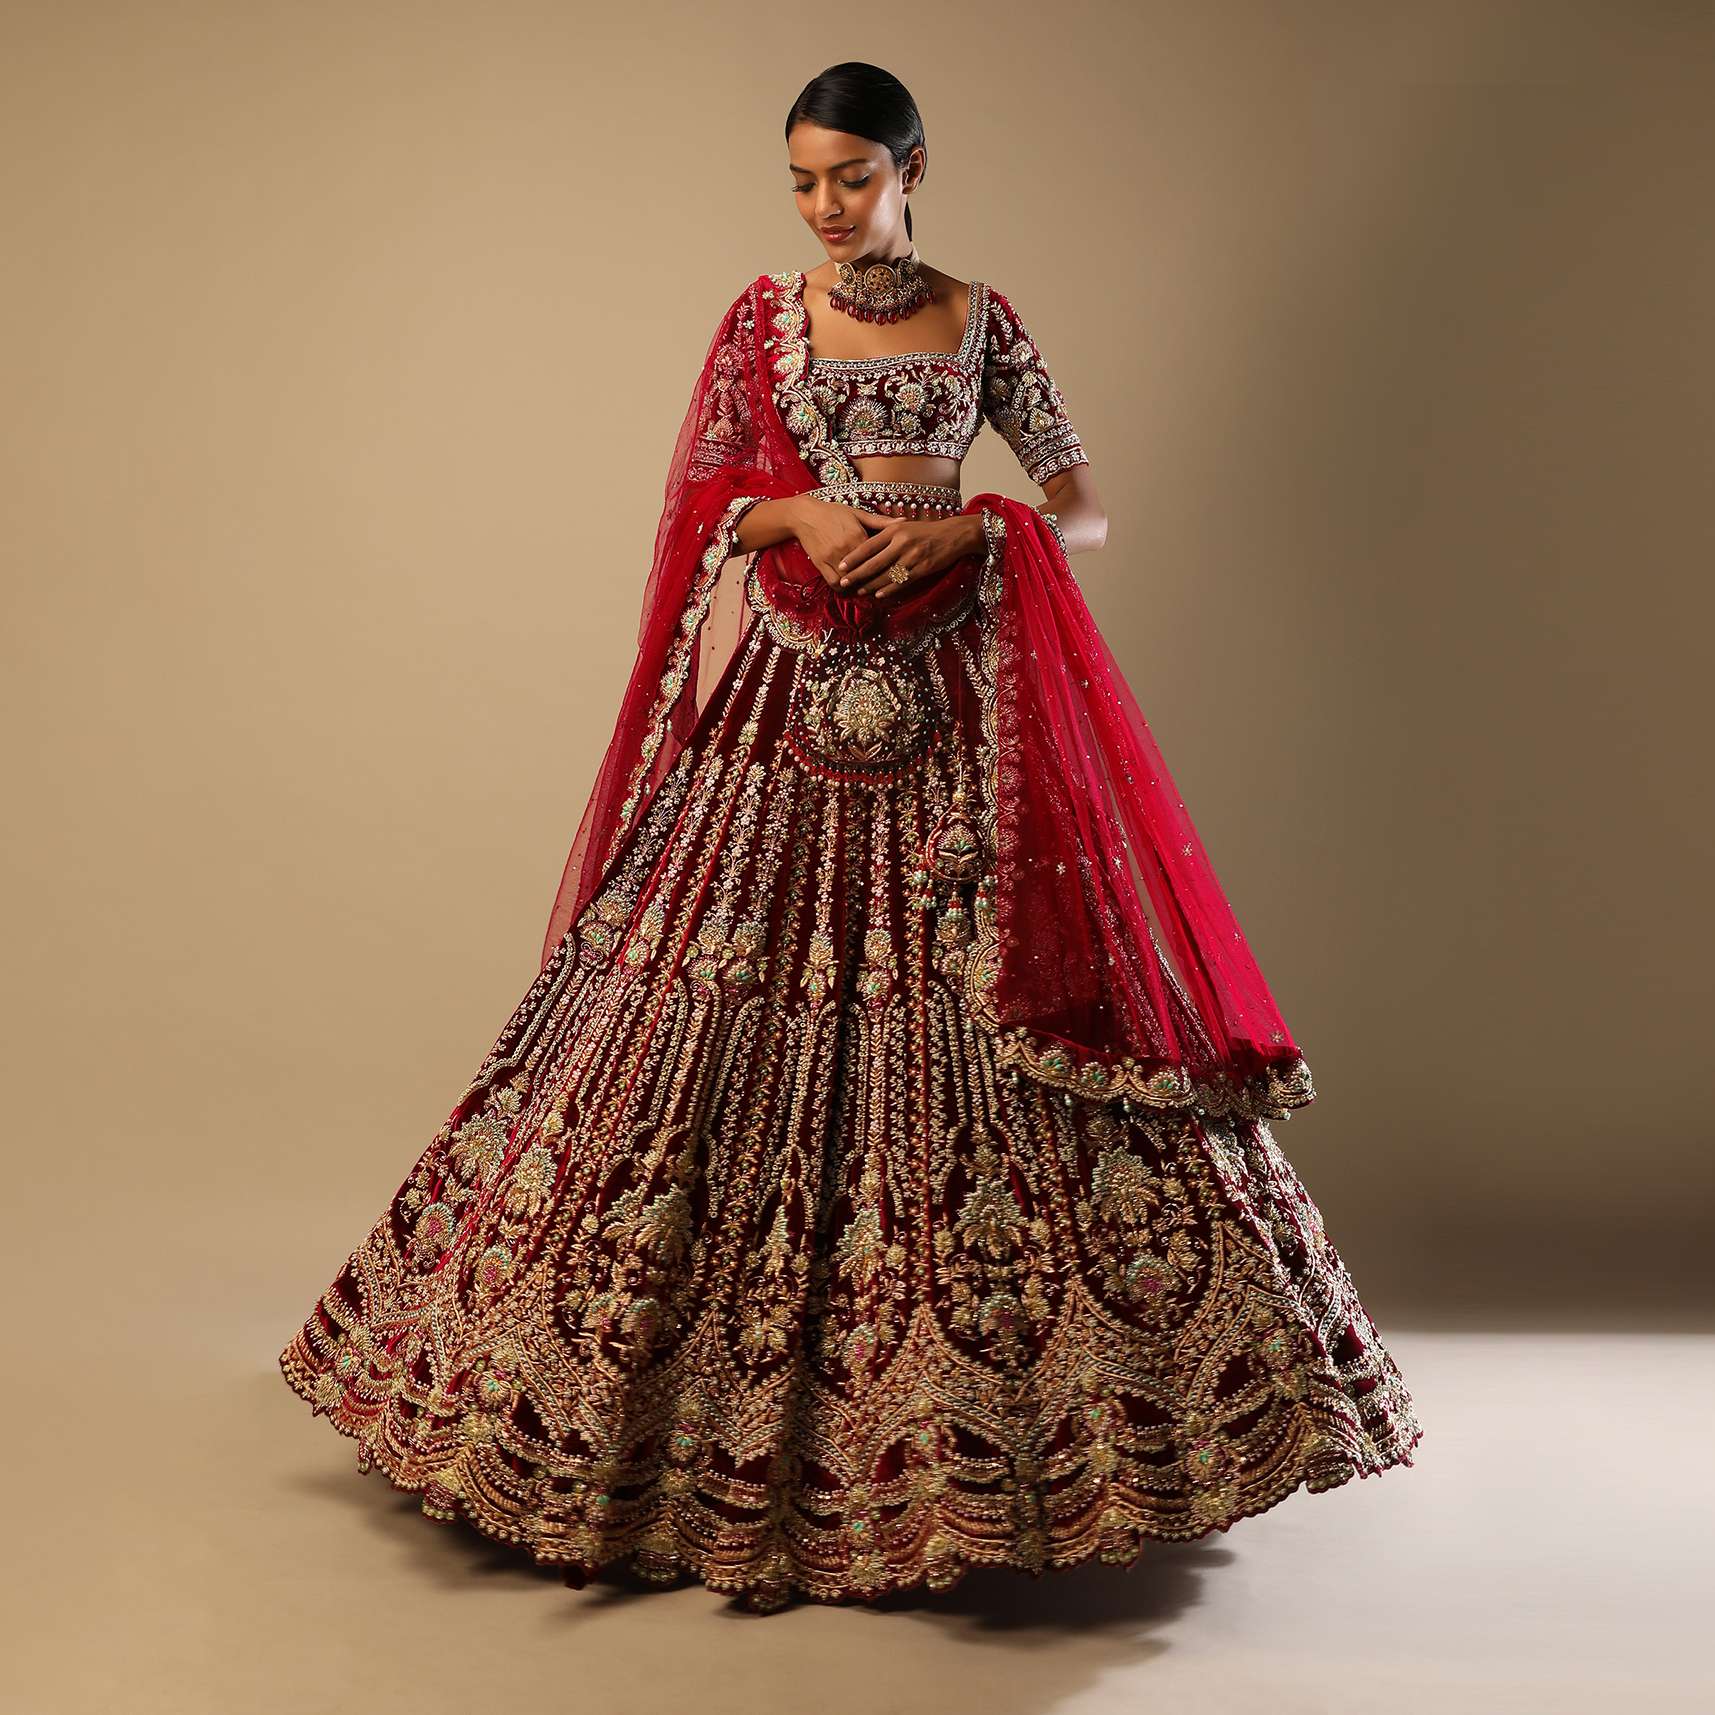 Persian Red Lehenga Choli In Velvet With Multi Colored Hand Embroidered Mughal Kalis And Floral Motifs